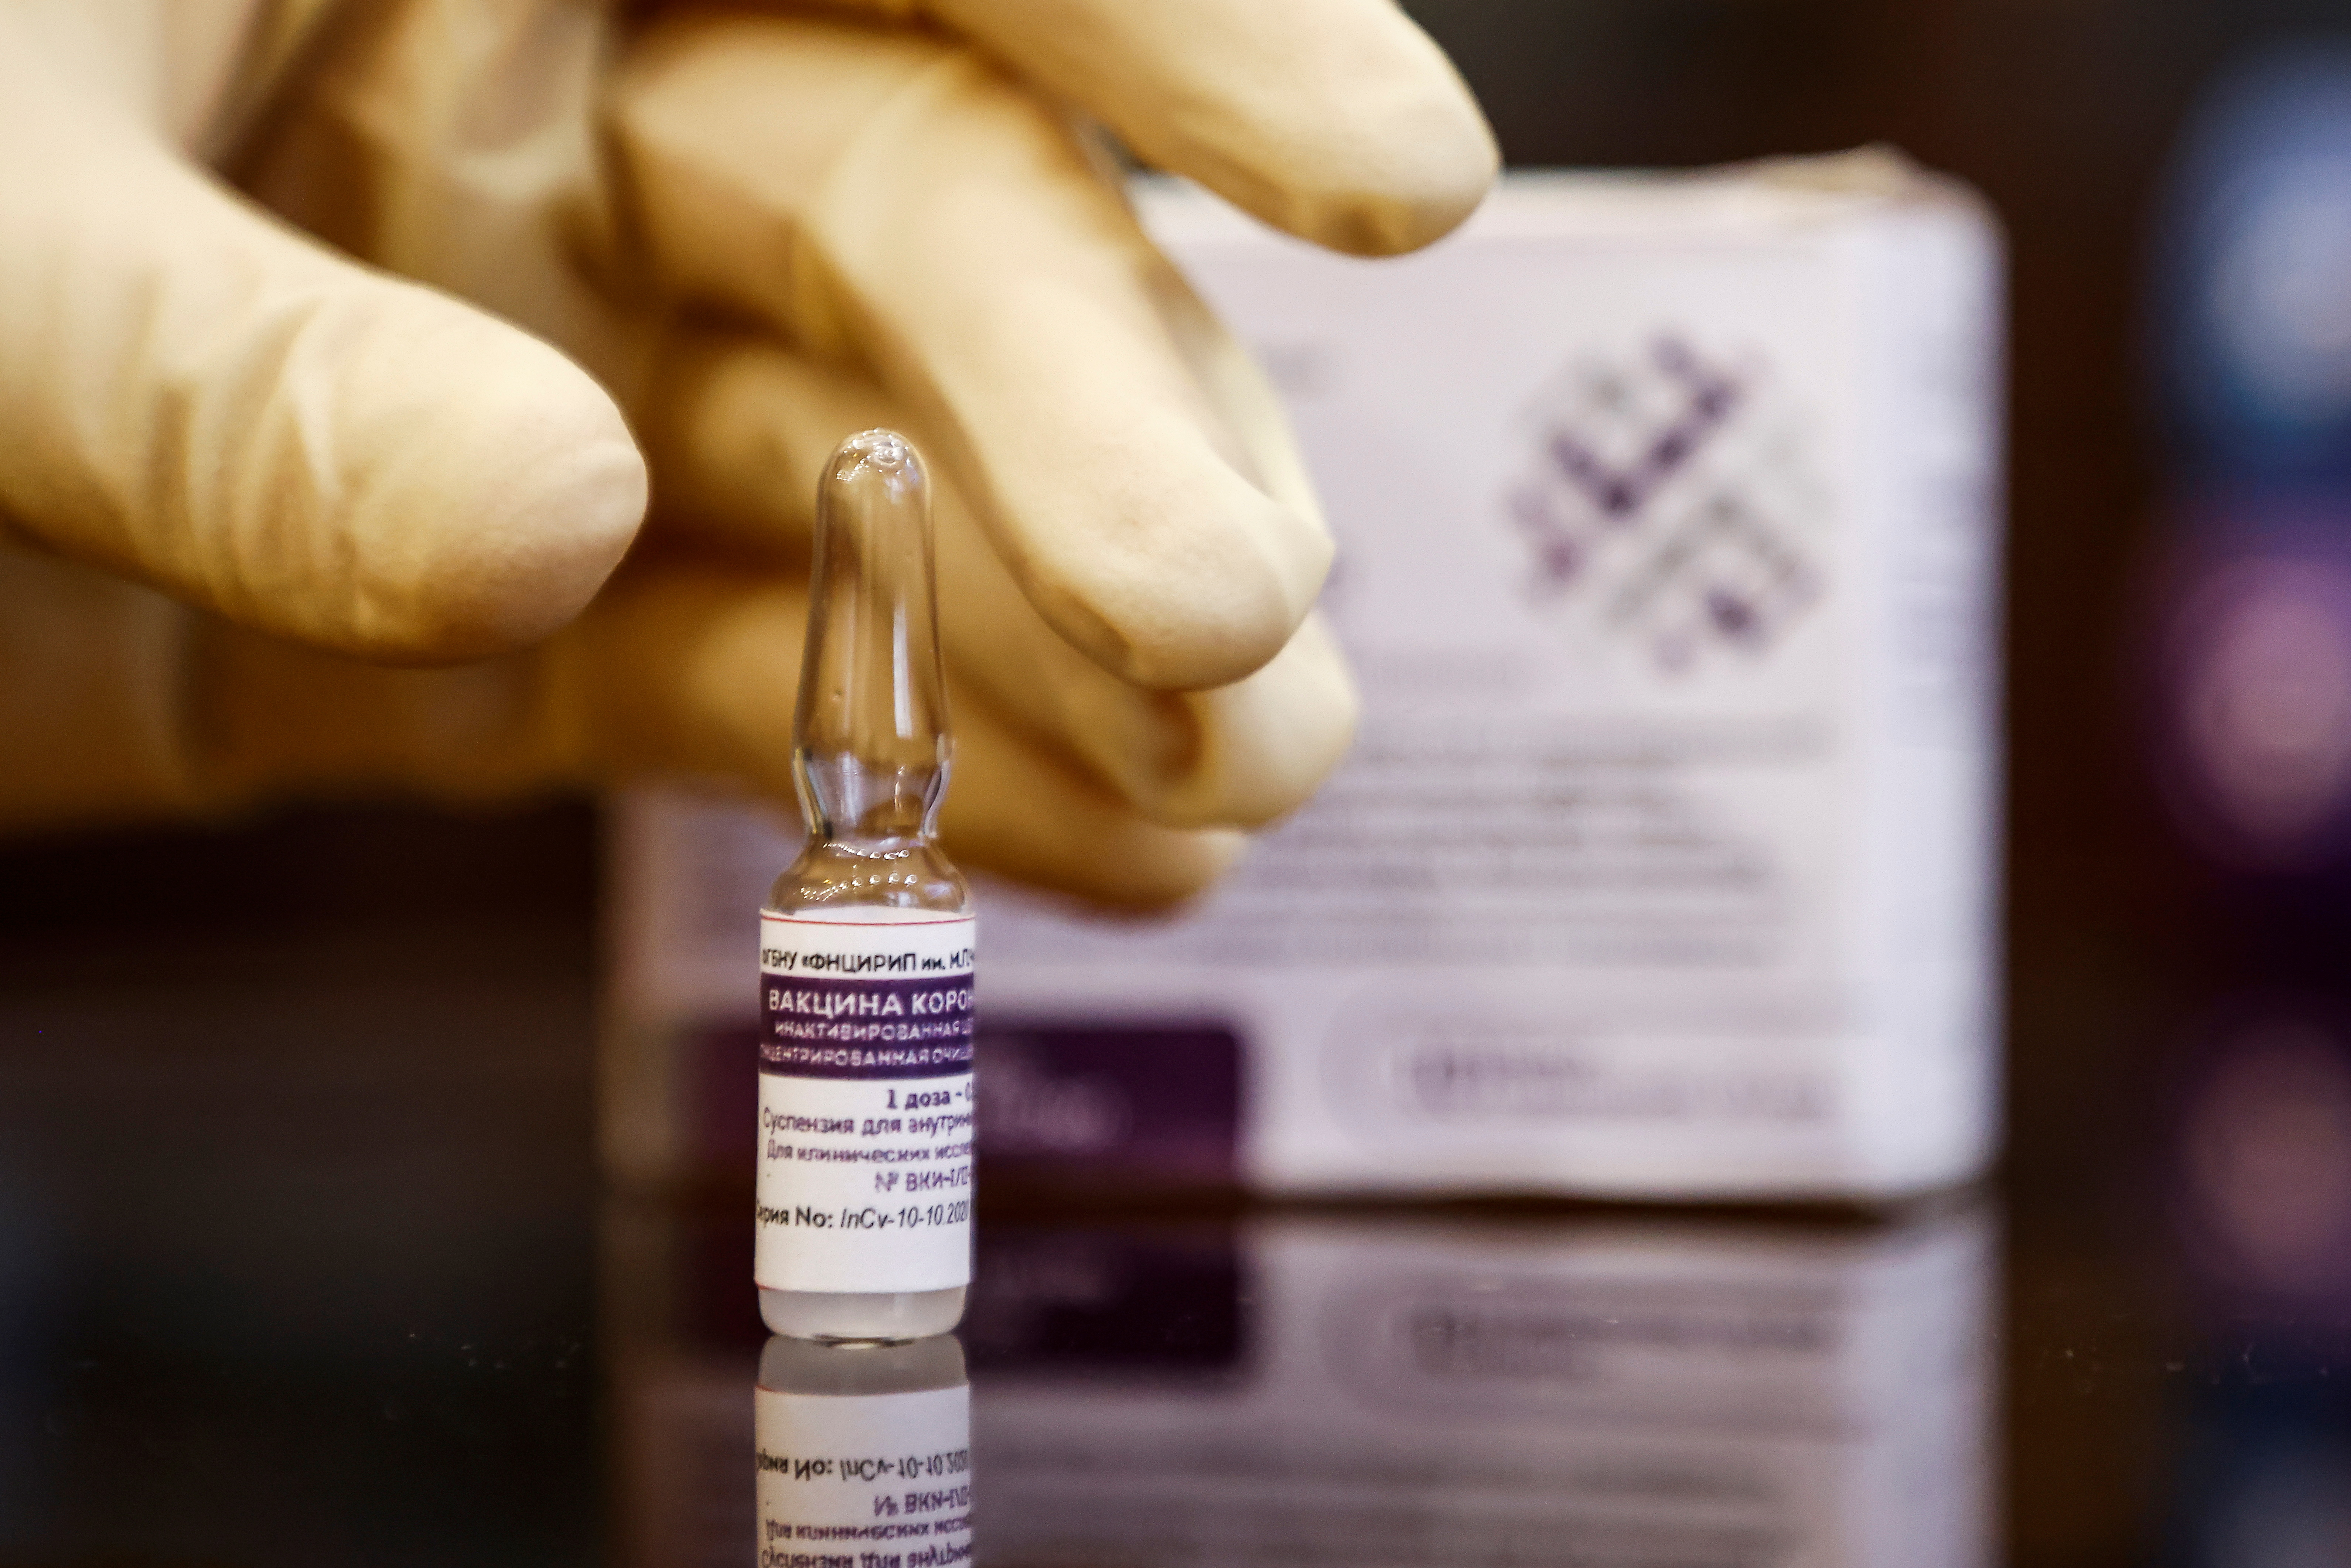 Development of Russia's third vaccine against the coronavirus disease (COVID-19) in Moscow